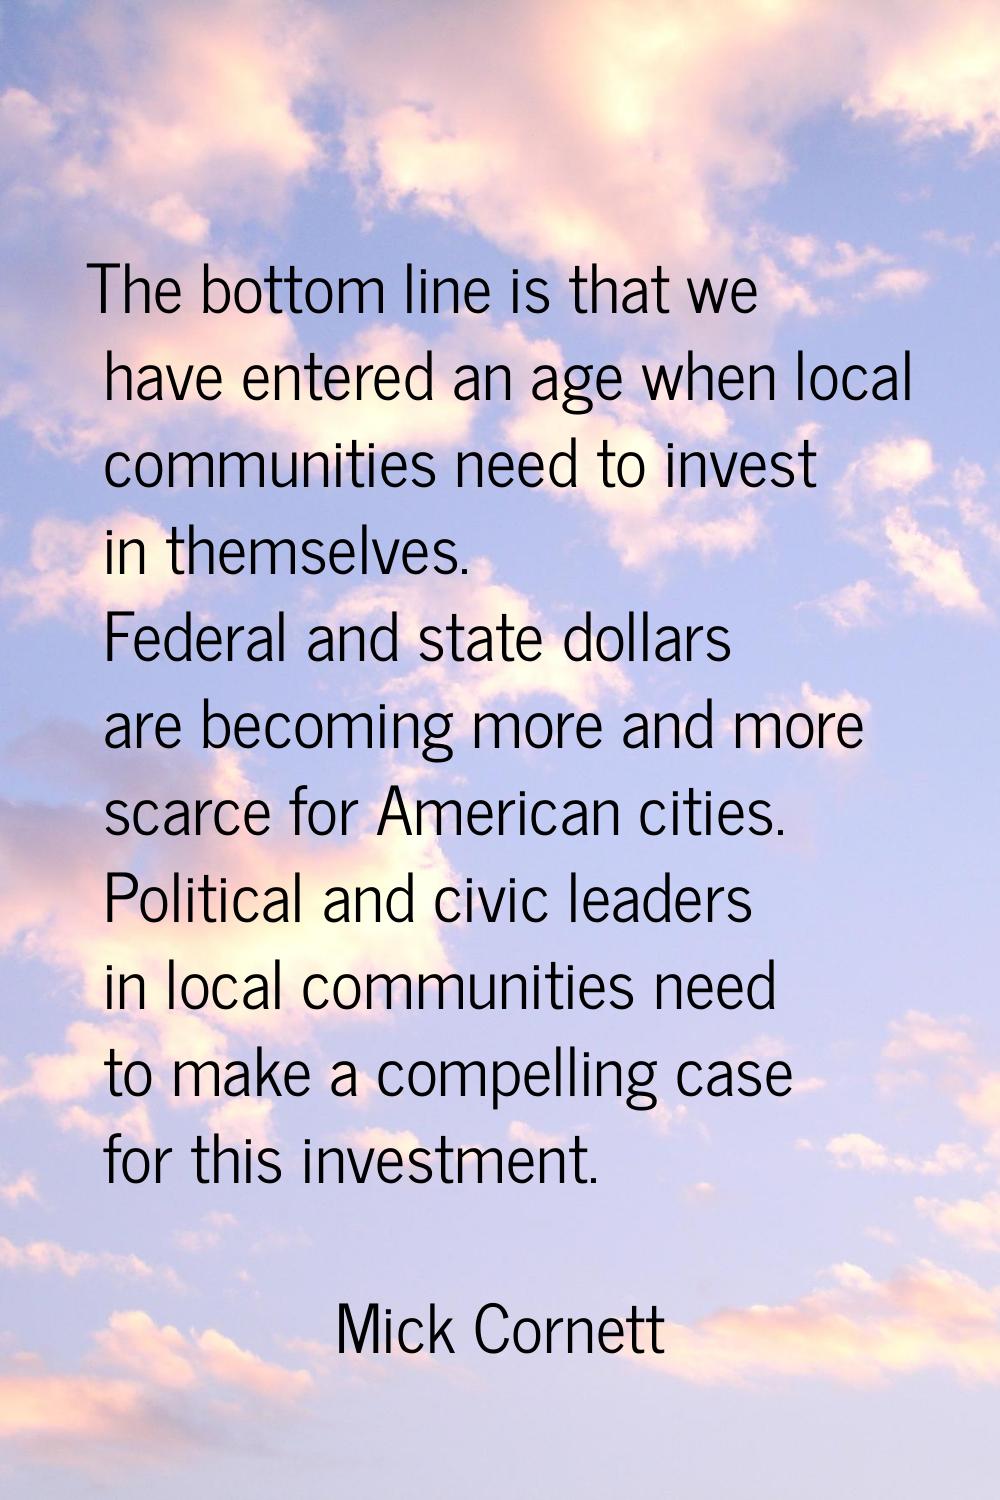 The bottom line is that we have entered an age when local communities need to invest in themselves.